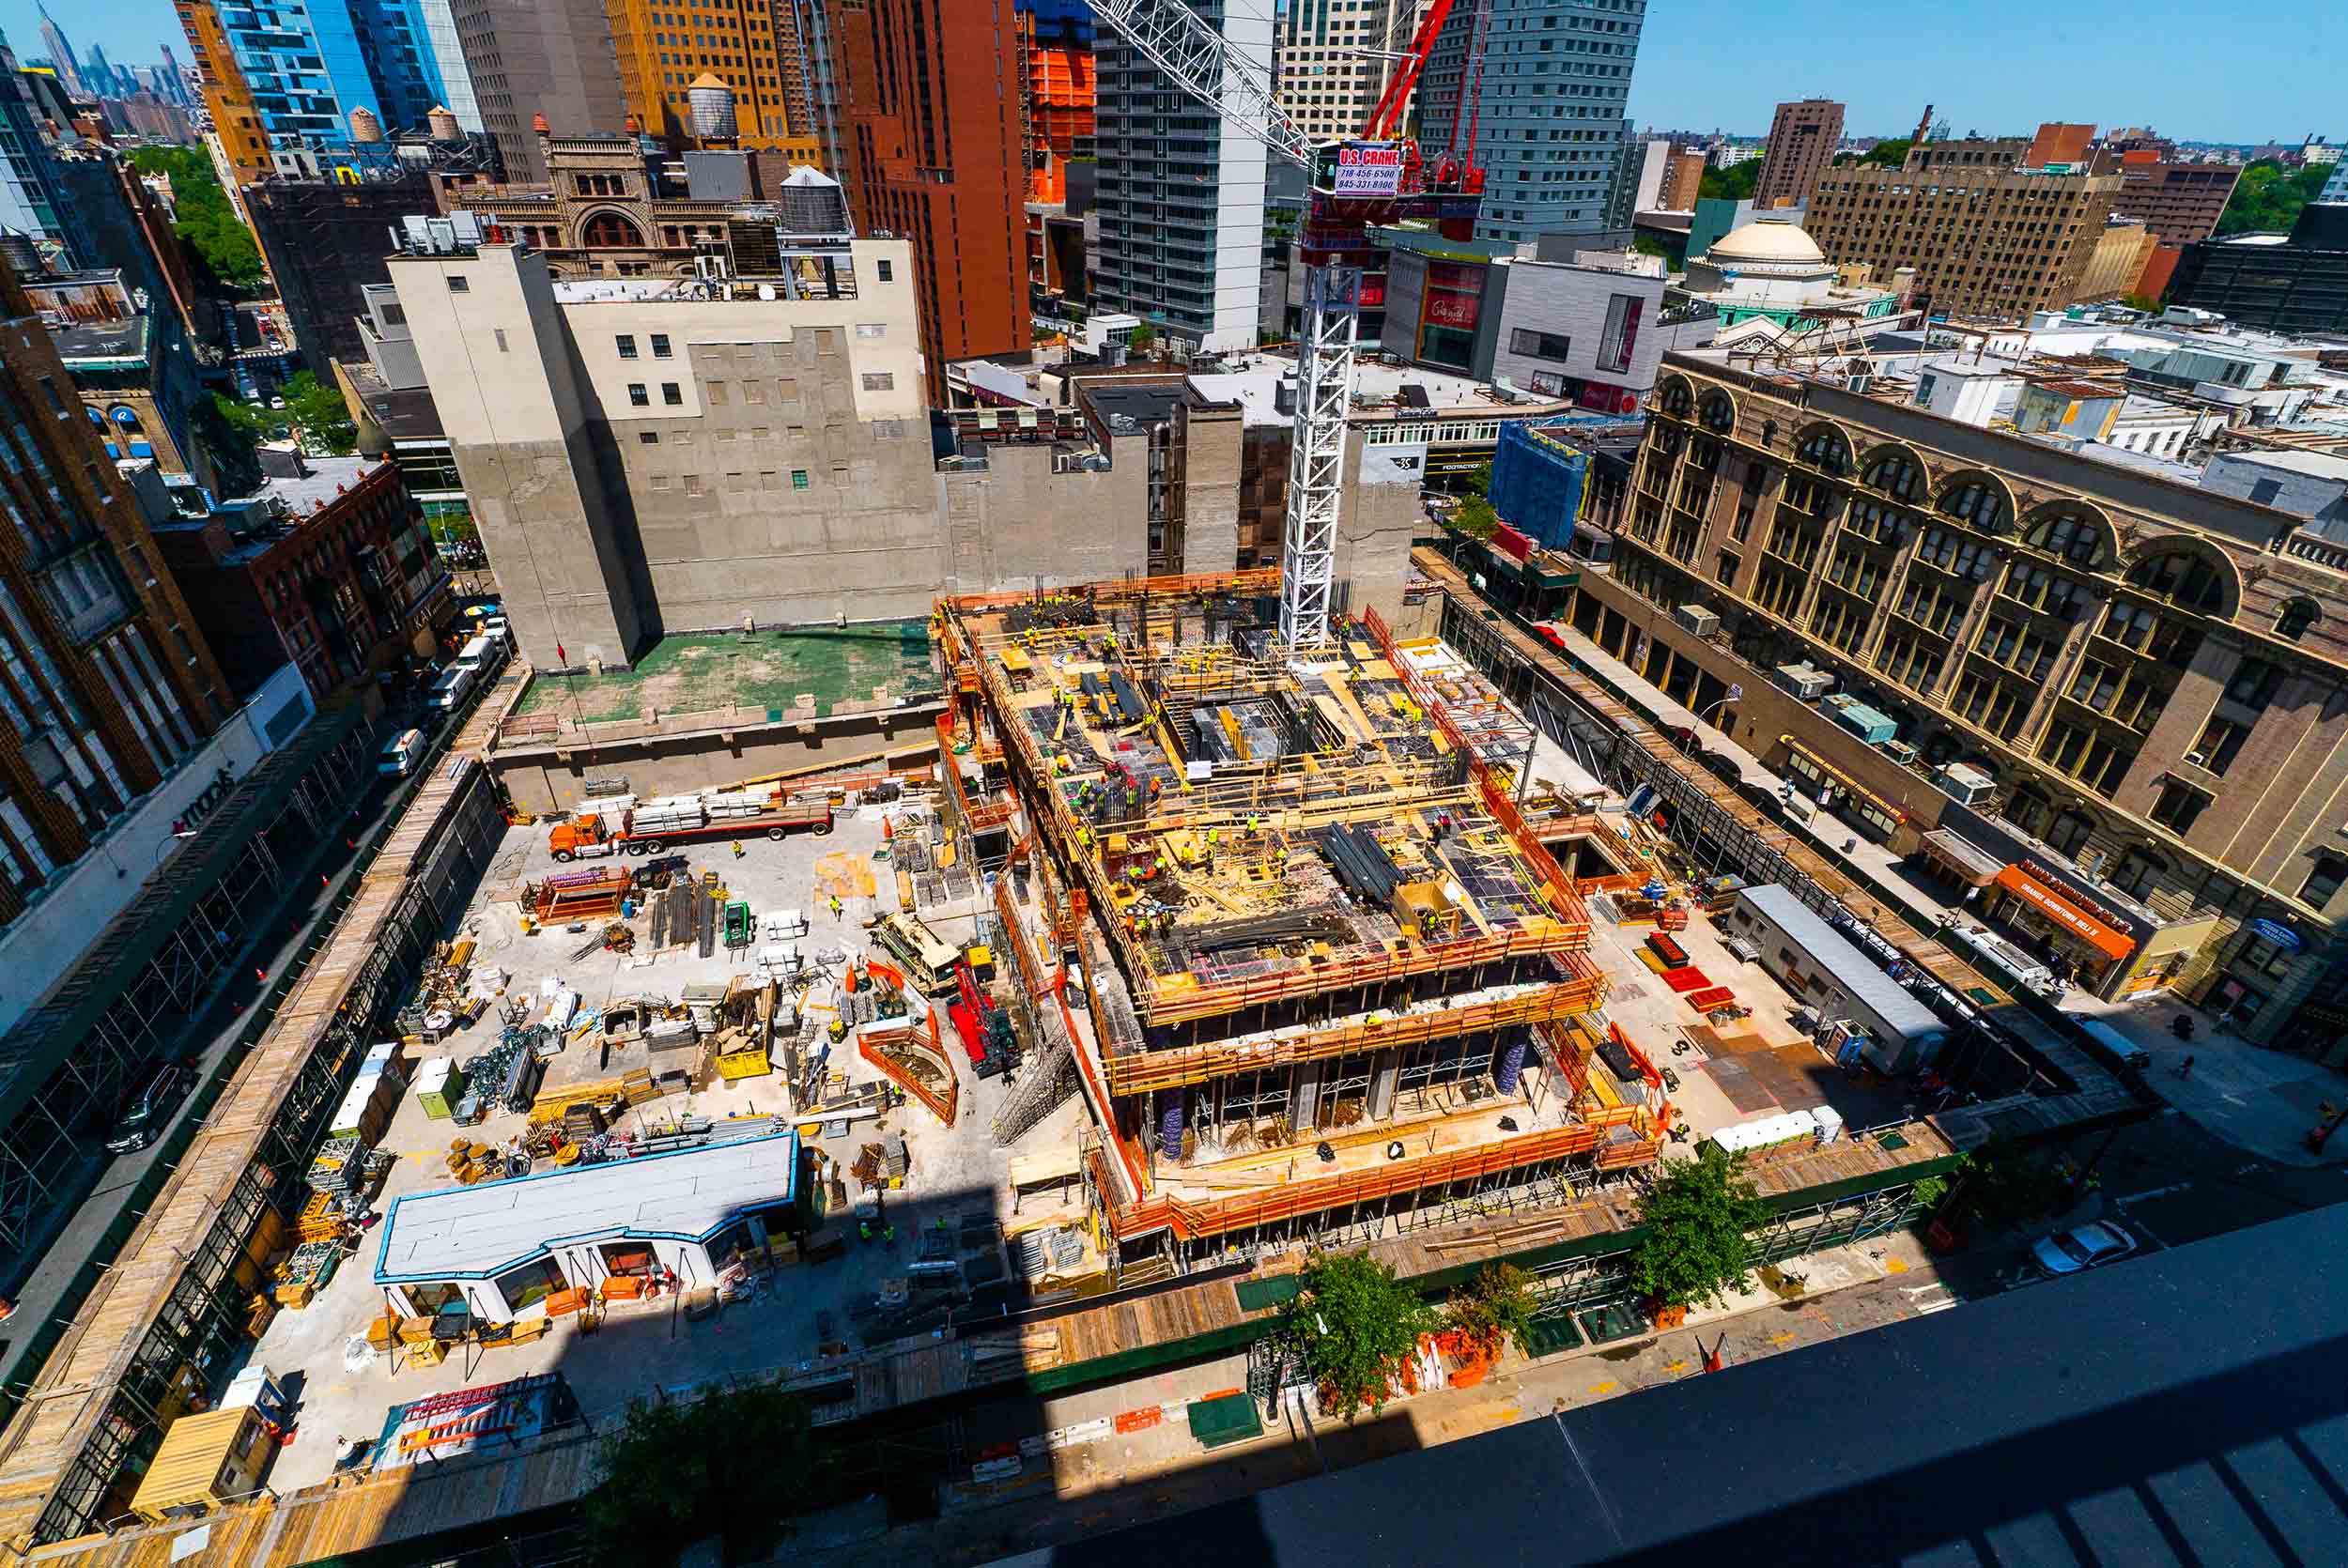 The construction project of the 52 story residential building, 11 Hoyt, located in Brooklyn, New York, is an example of teamwork and close collaboration between StructureTech New York, Inc. and ULMA.